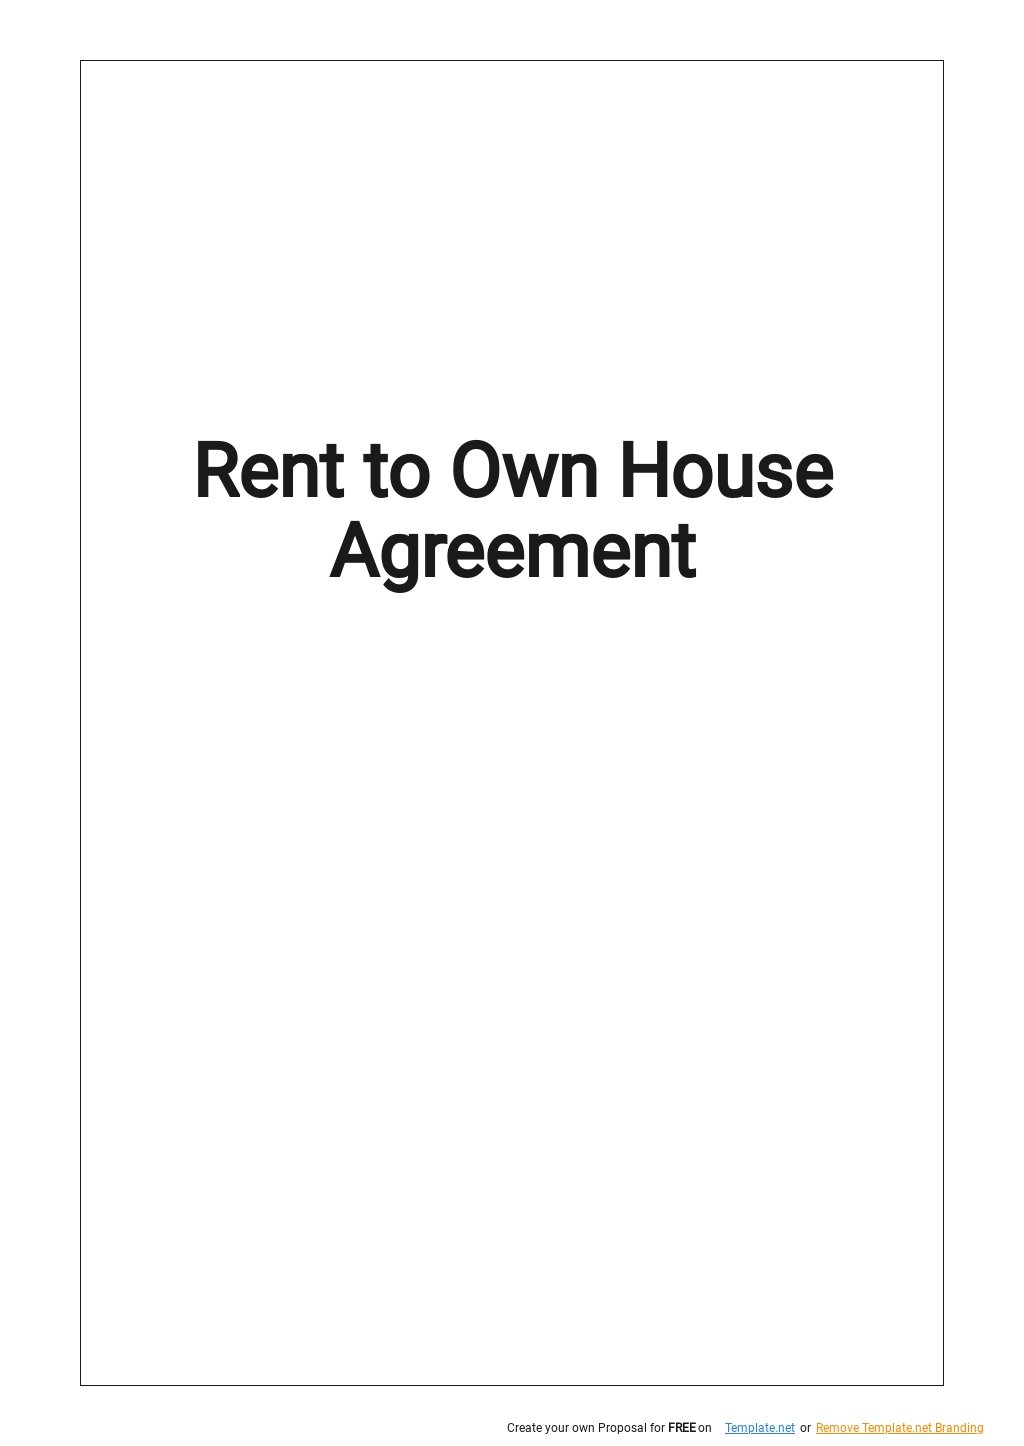 residential-lease-agreement-templates-documents-design-free